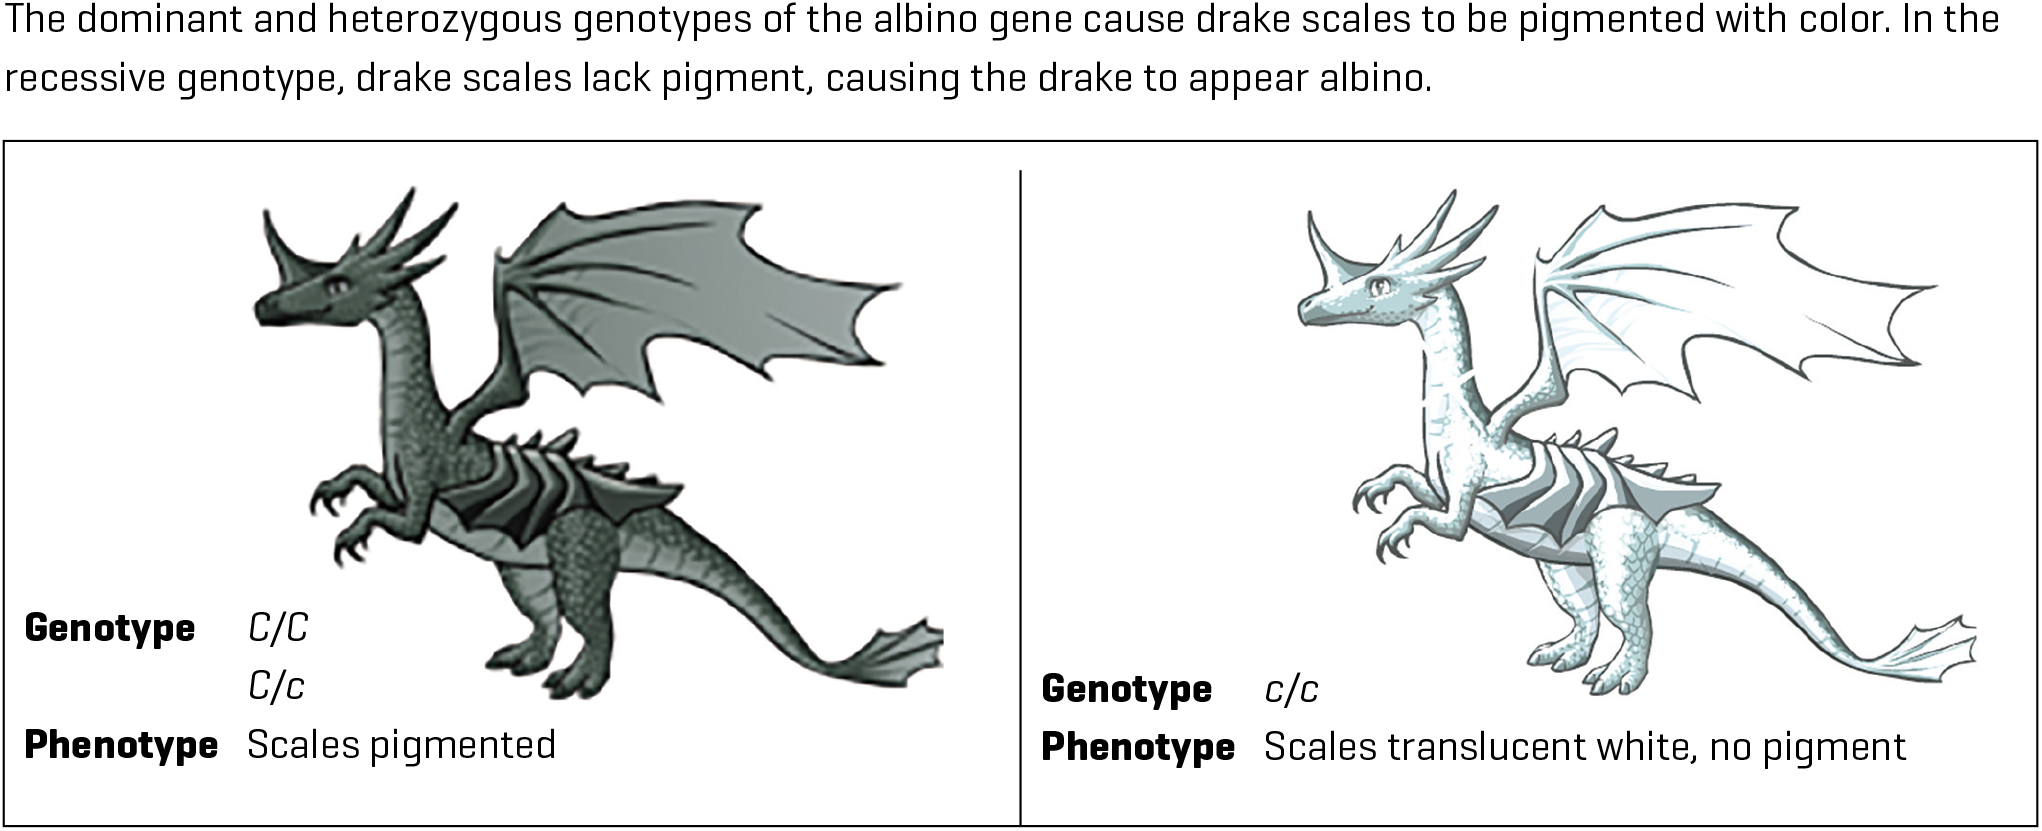 The dominant and heterozygous genotypes of the albino gene cause drake scales to be pigmented with color. In the recessive genotype, drake scales lack pigment, causing the drake to appear albino